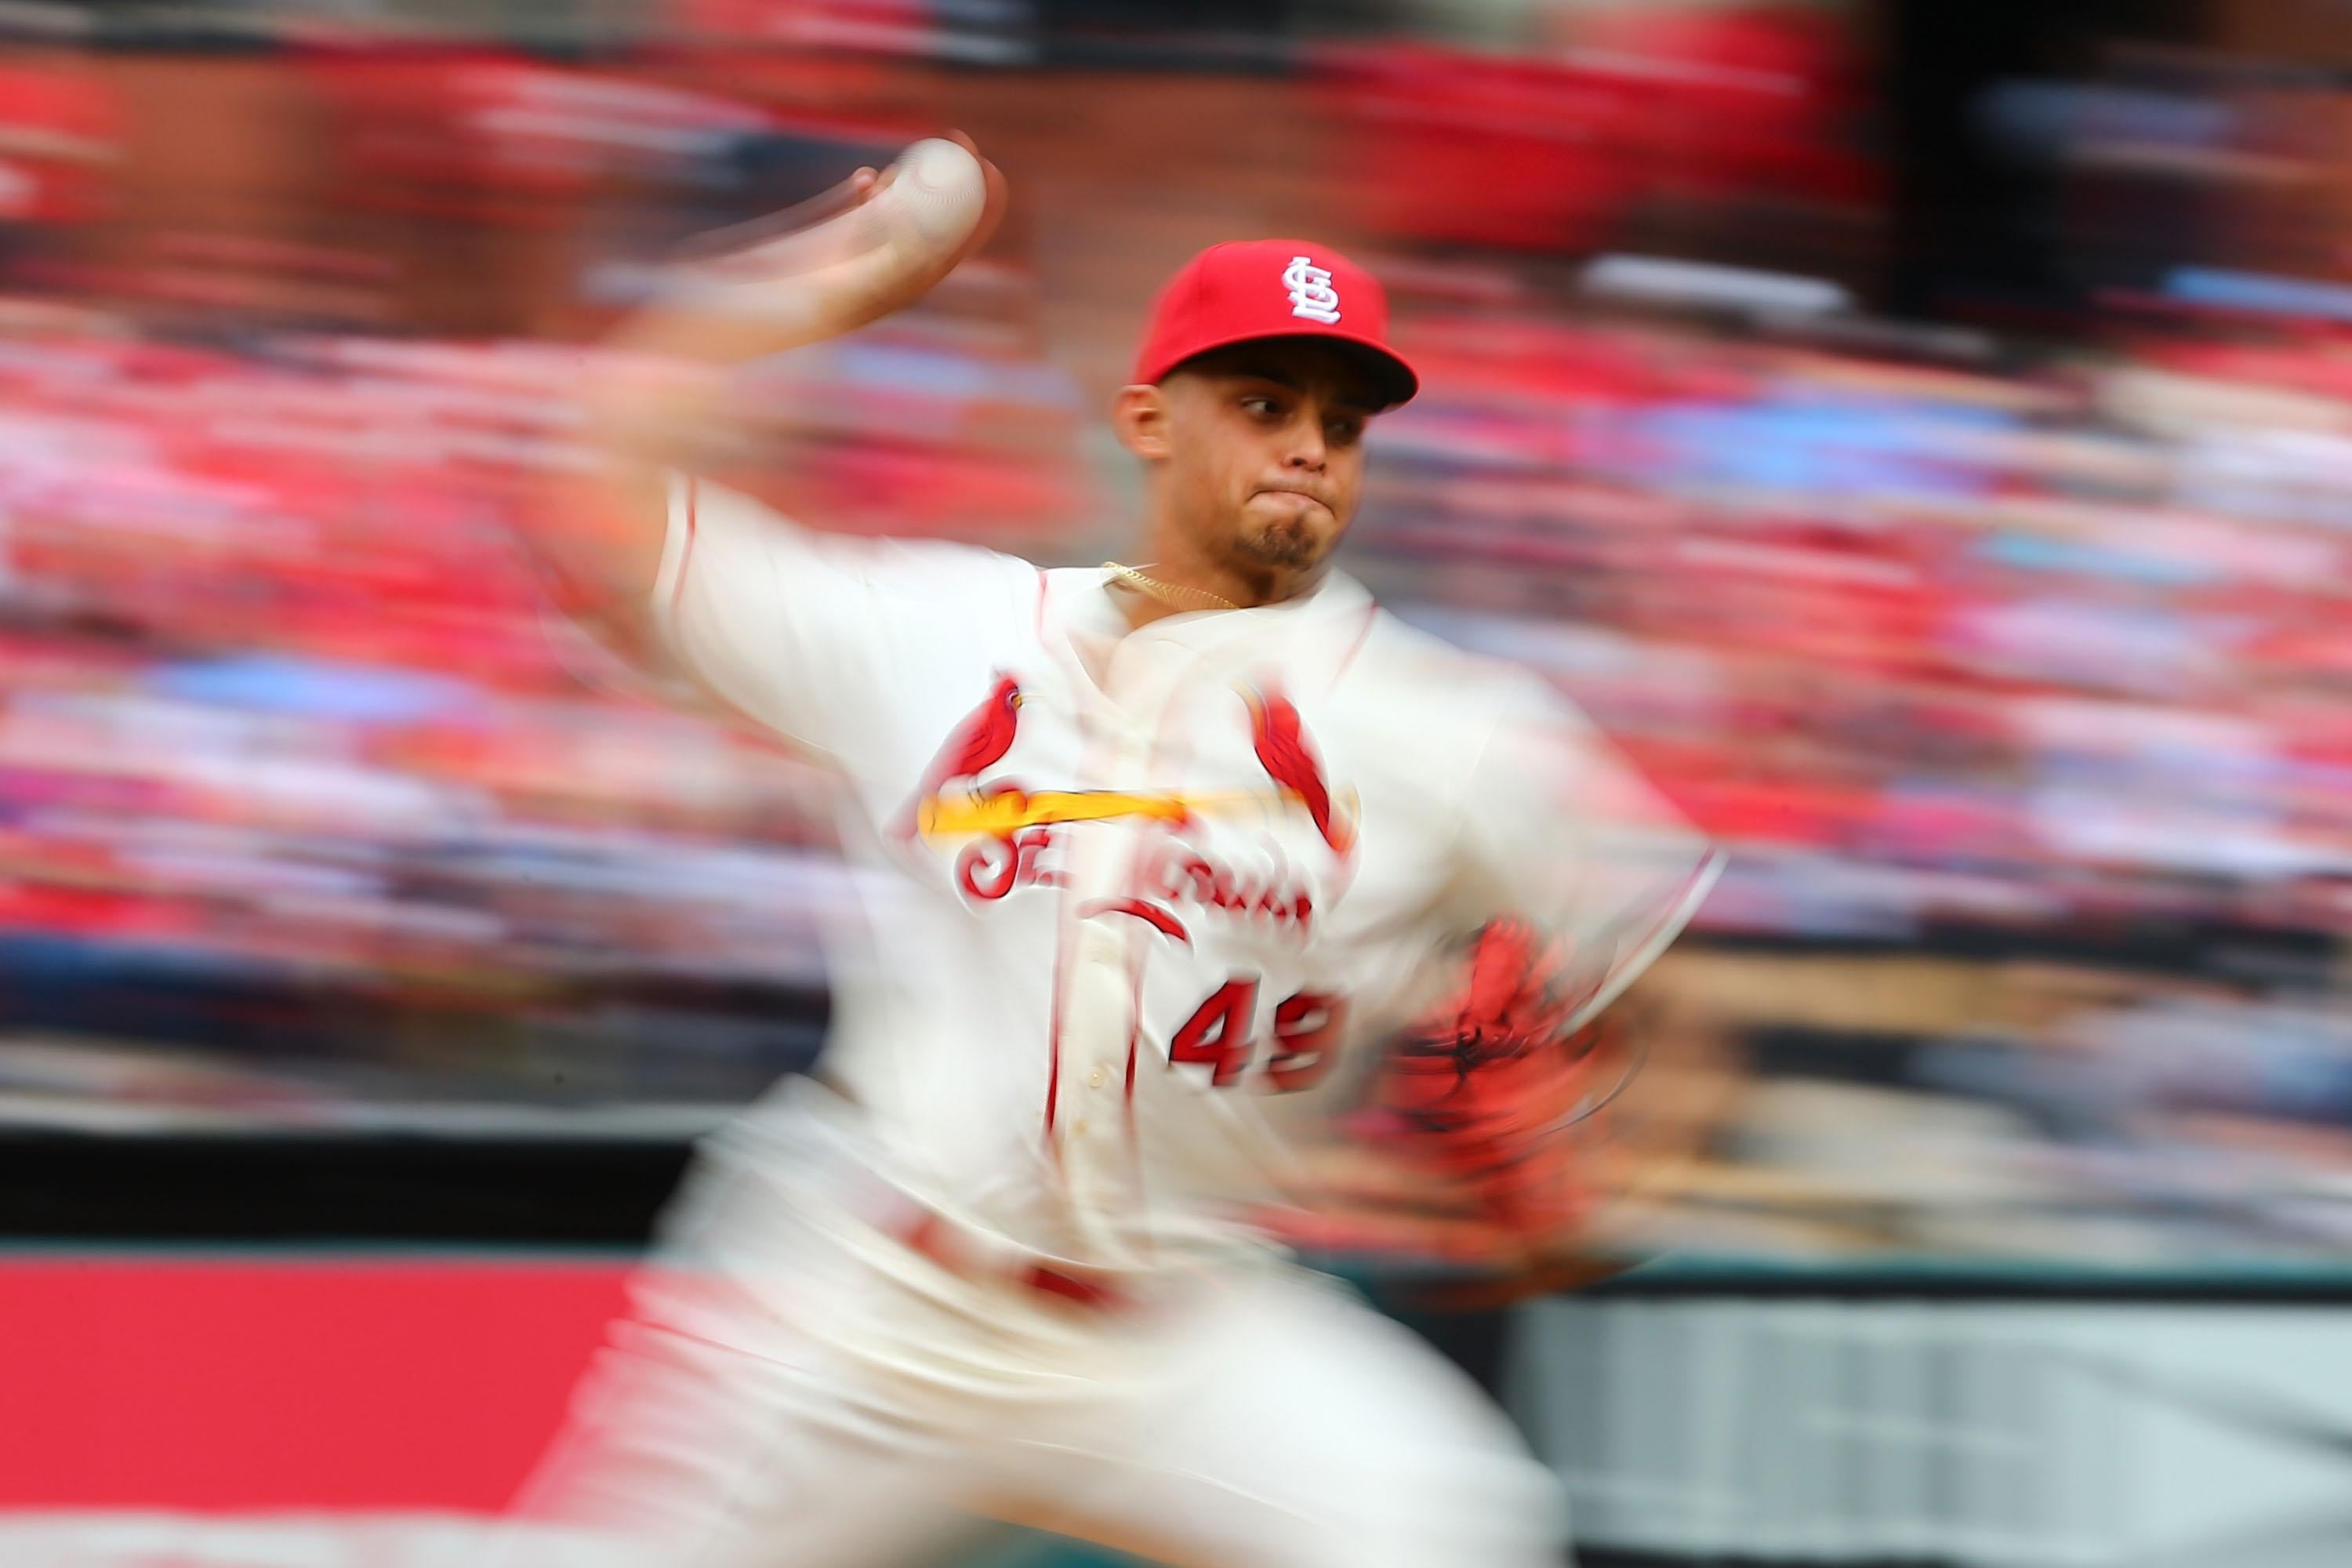 Jordan Hicks, Cardinals roasted by social media after throwing error leads  to Marlins walk-off win